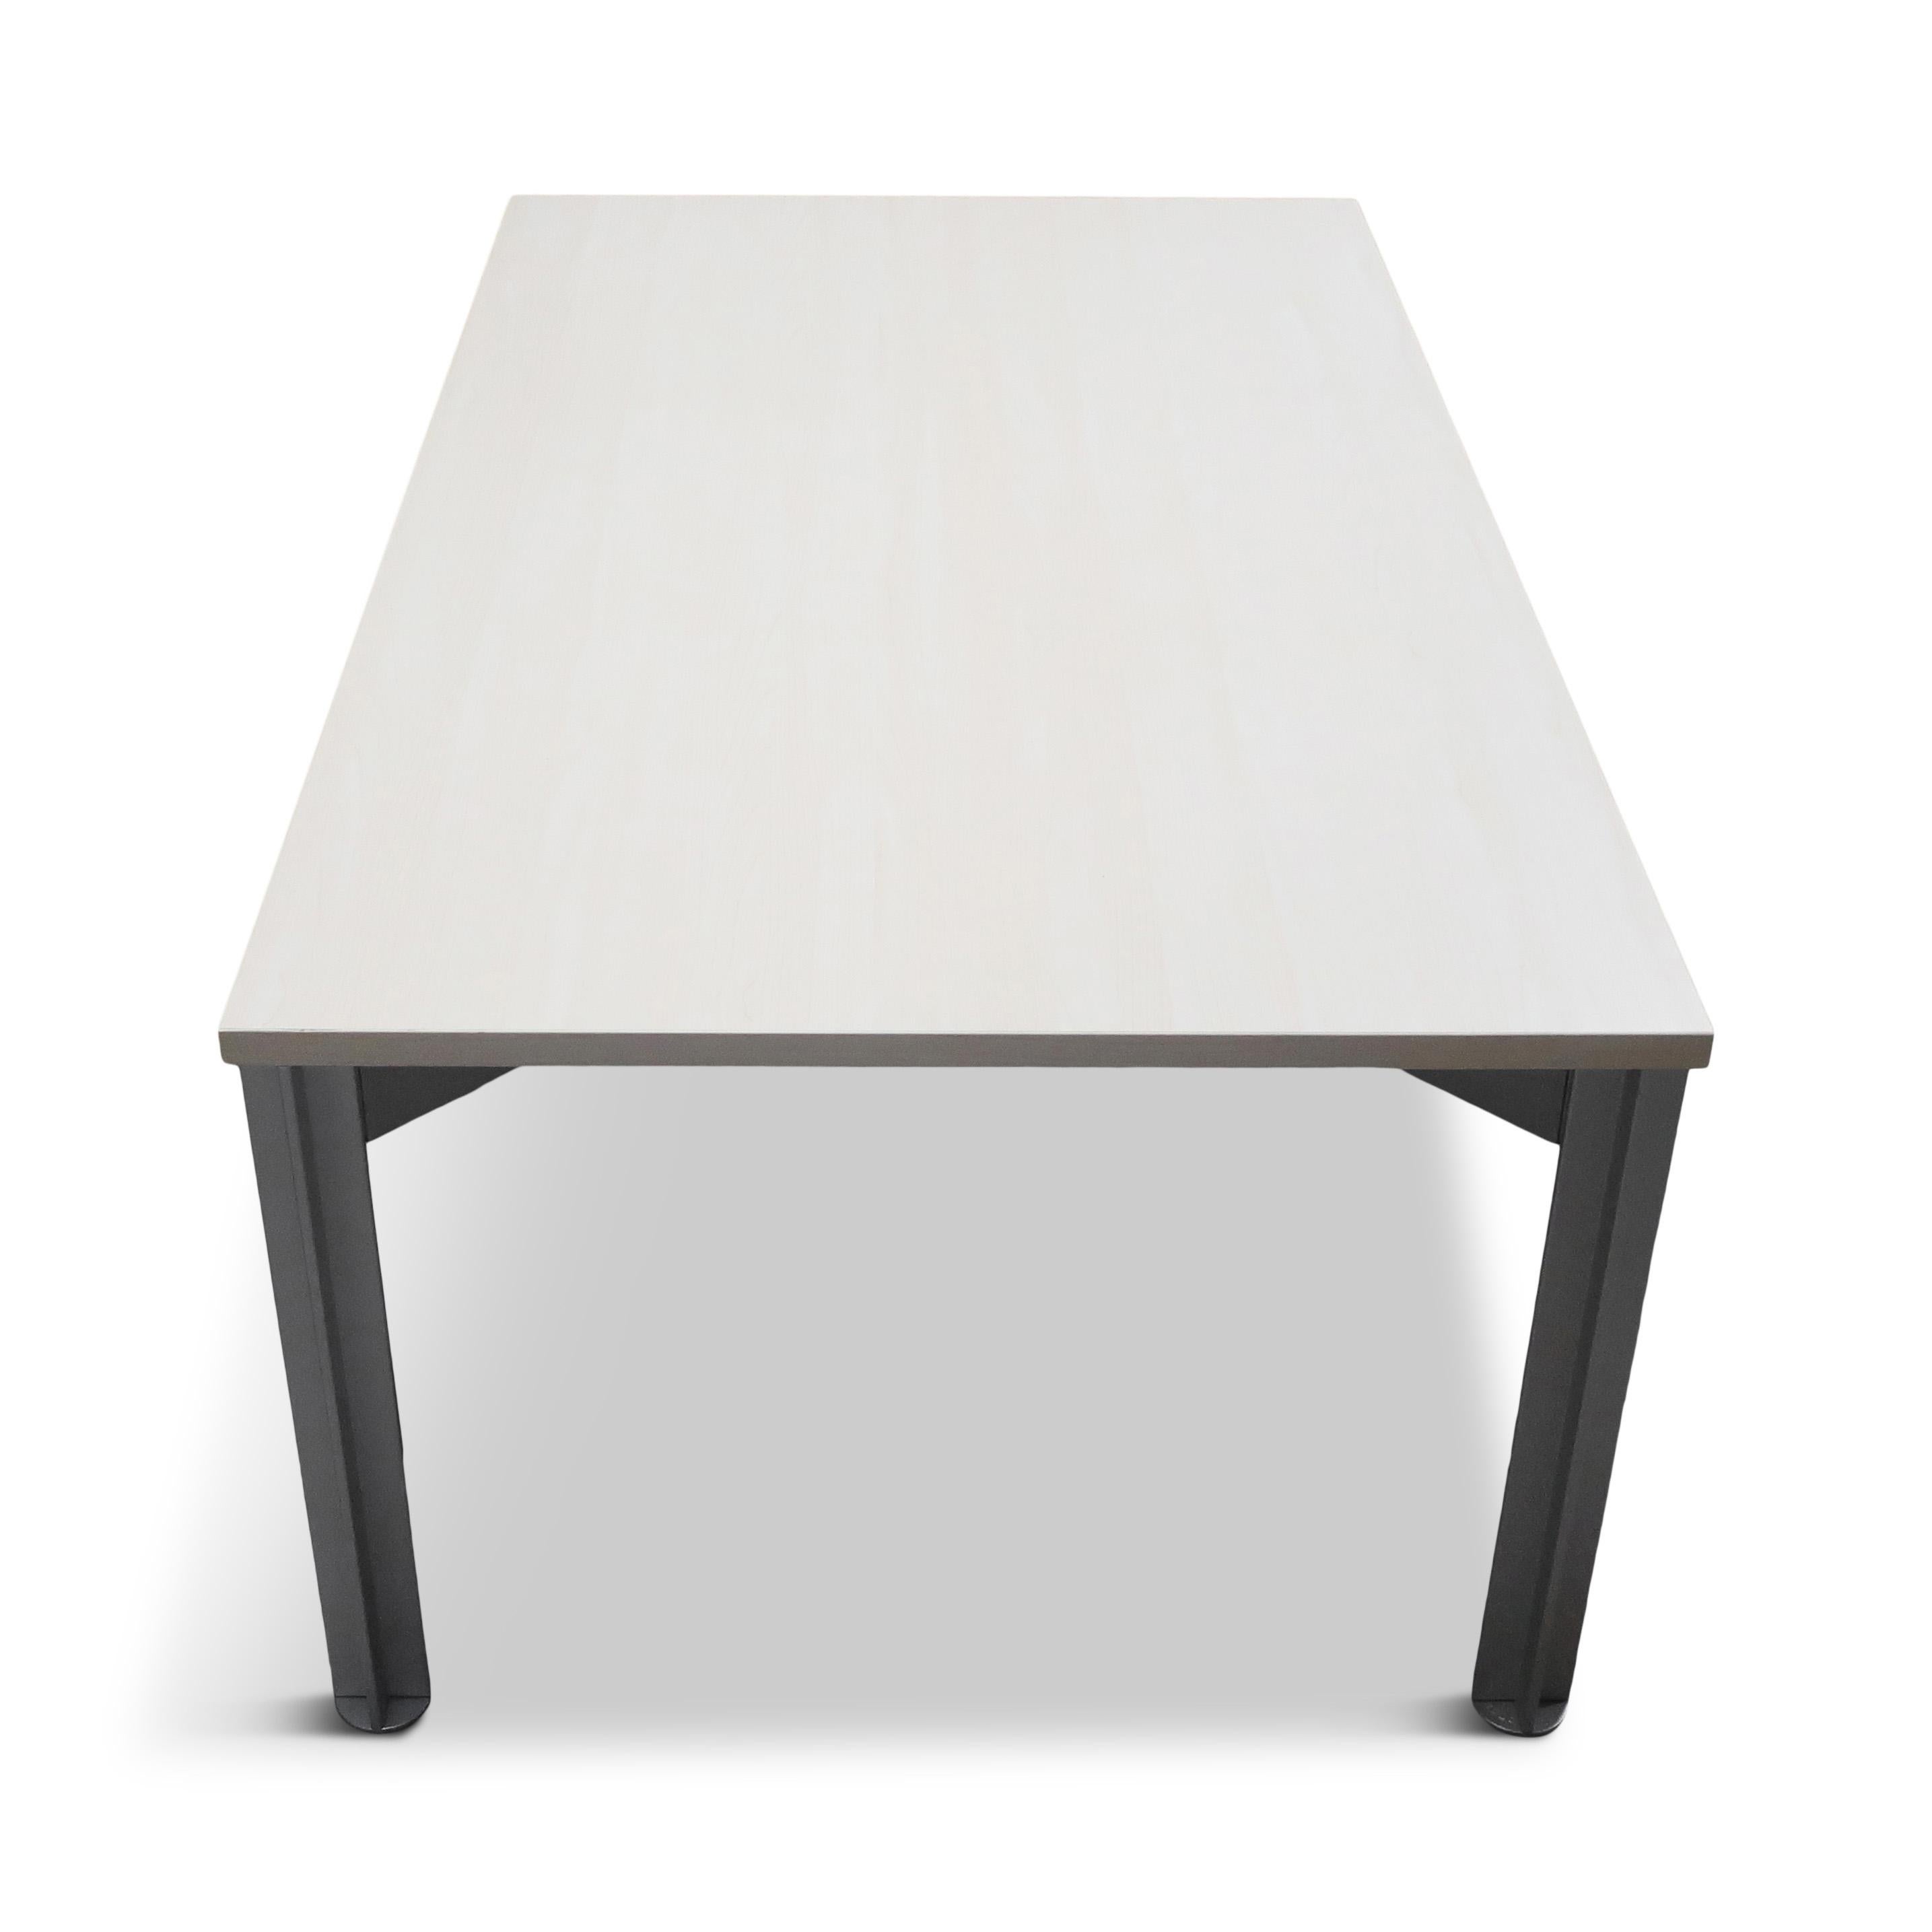 Designed by Claire Bataille and Paul Ibens in 1994 for Bulo, the Belgian furniture maker, this simple rectangular table from the H20 line has an off-white top on 4 cross-shaped legs. The table can function as work, meeting or dining table and fits